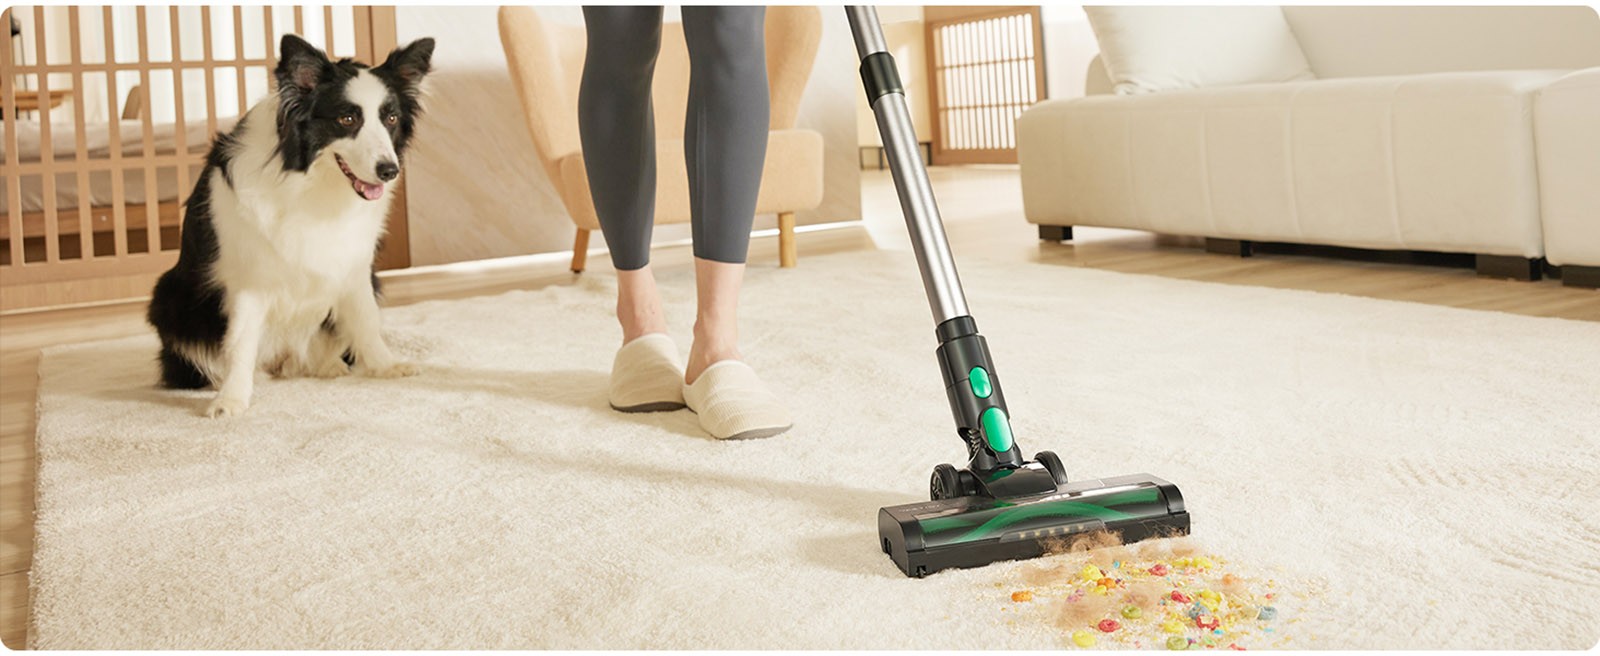 Vactidy V9 Cordless Vacuum Cleaner, 25KPa Suction, 1L Dustbin, 5 Layers Filtration System, One-Button Emptying, LED Touch Panel, Bright LED Headlights, Up to 45min Runtime